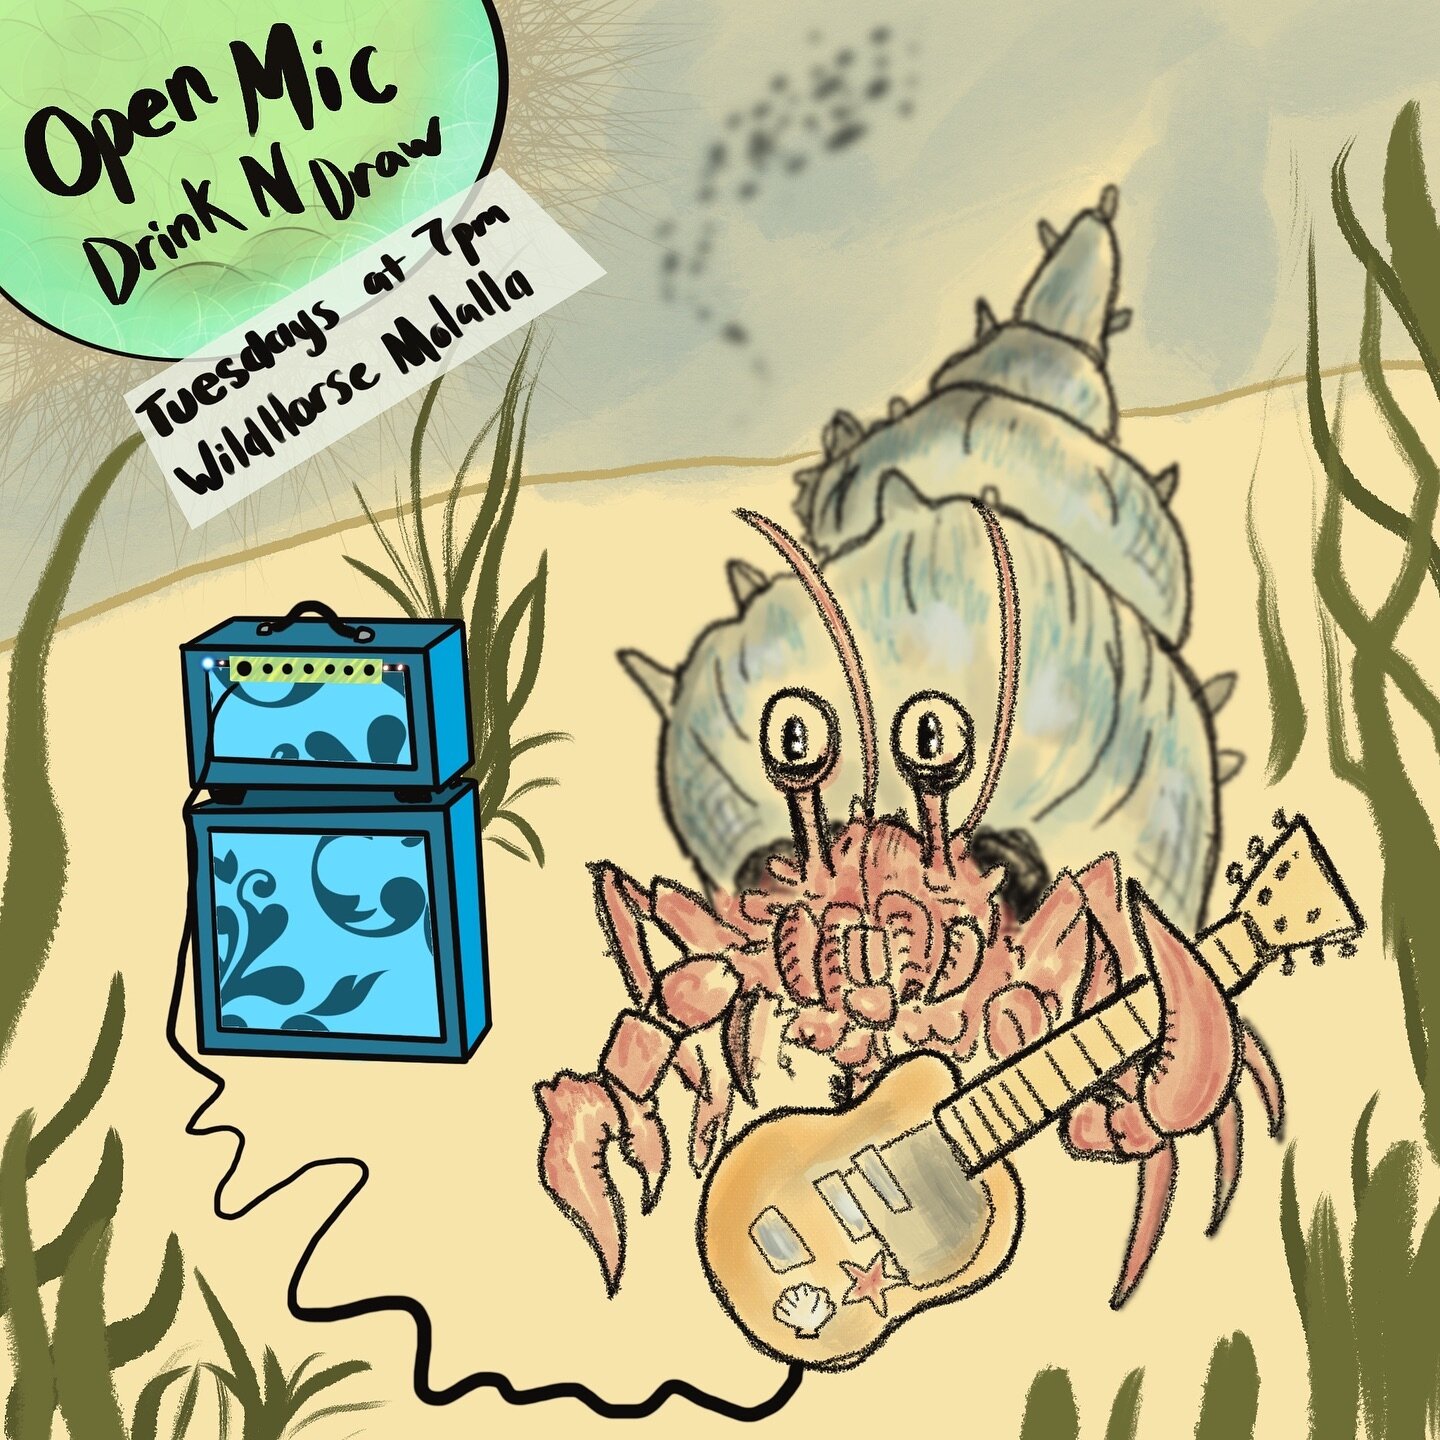 I know you&rsquo;re probably tired of ads for my open mic. I know I post them every week. I&rsquo;m doing it because I love it. I love to play music and draw pictures with friends. You can come too! 
No ice this week. 
Guest artist @even_sketchier wi